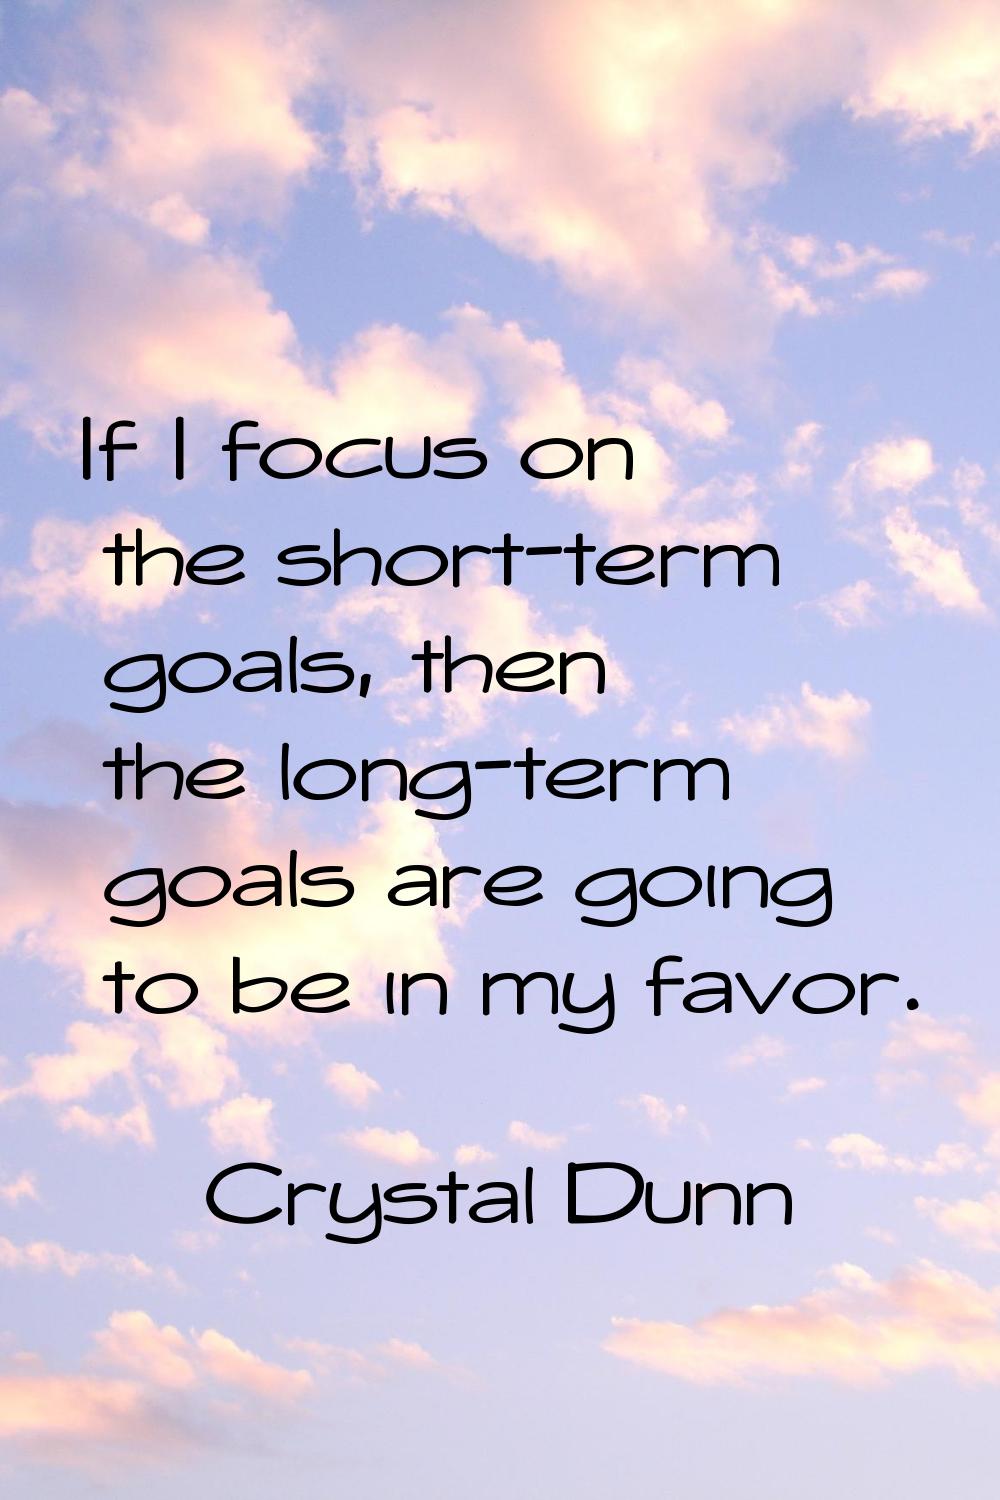 If I focus on the short-term goals, then the long-term goals are going to be in my favor.